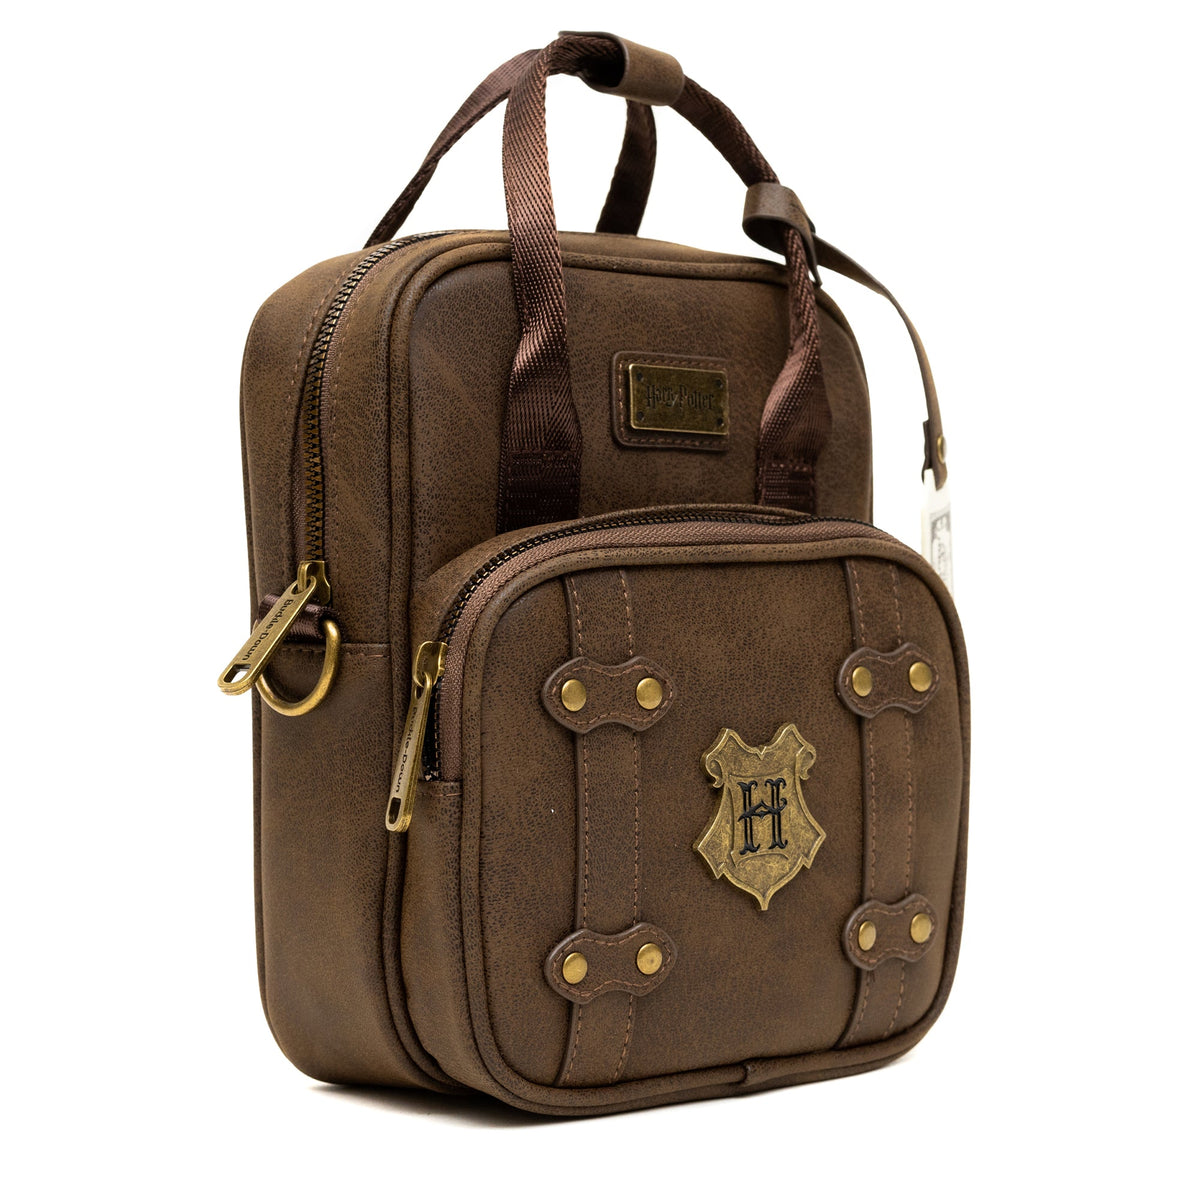 The Wizarding World of Harry Potter Bag, Cross Body, Harry Potter Hogwarts School of Witchcraft and Wizardry Brown, Vegan Leather